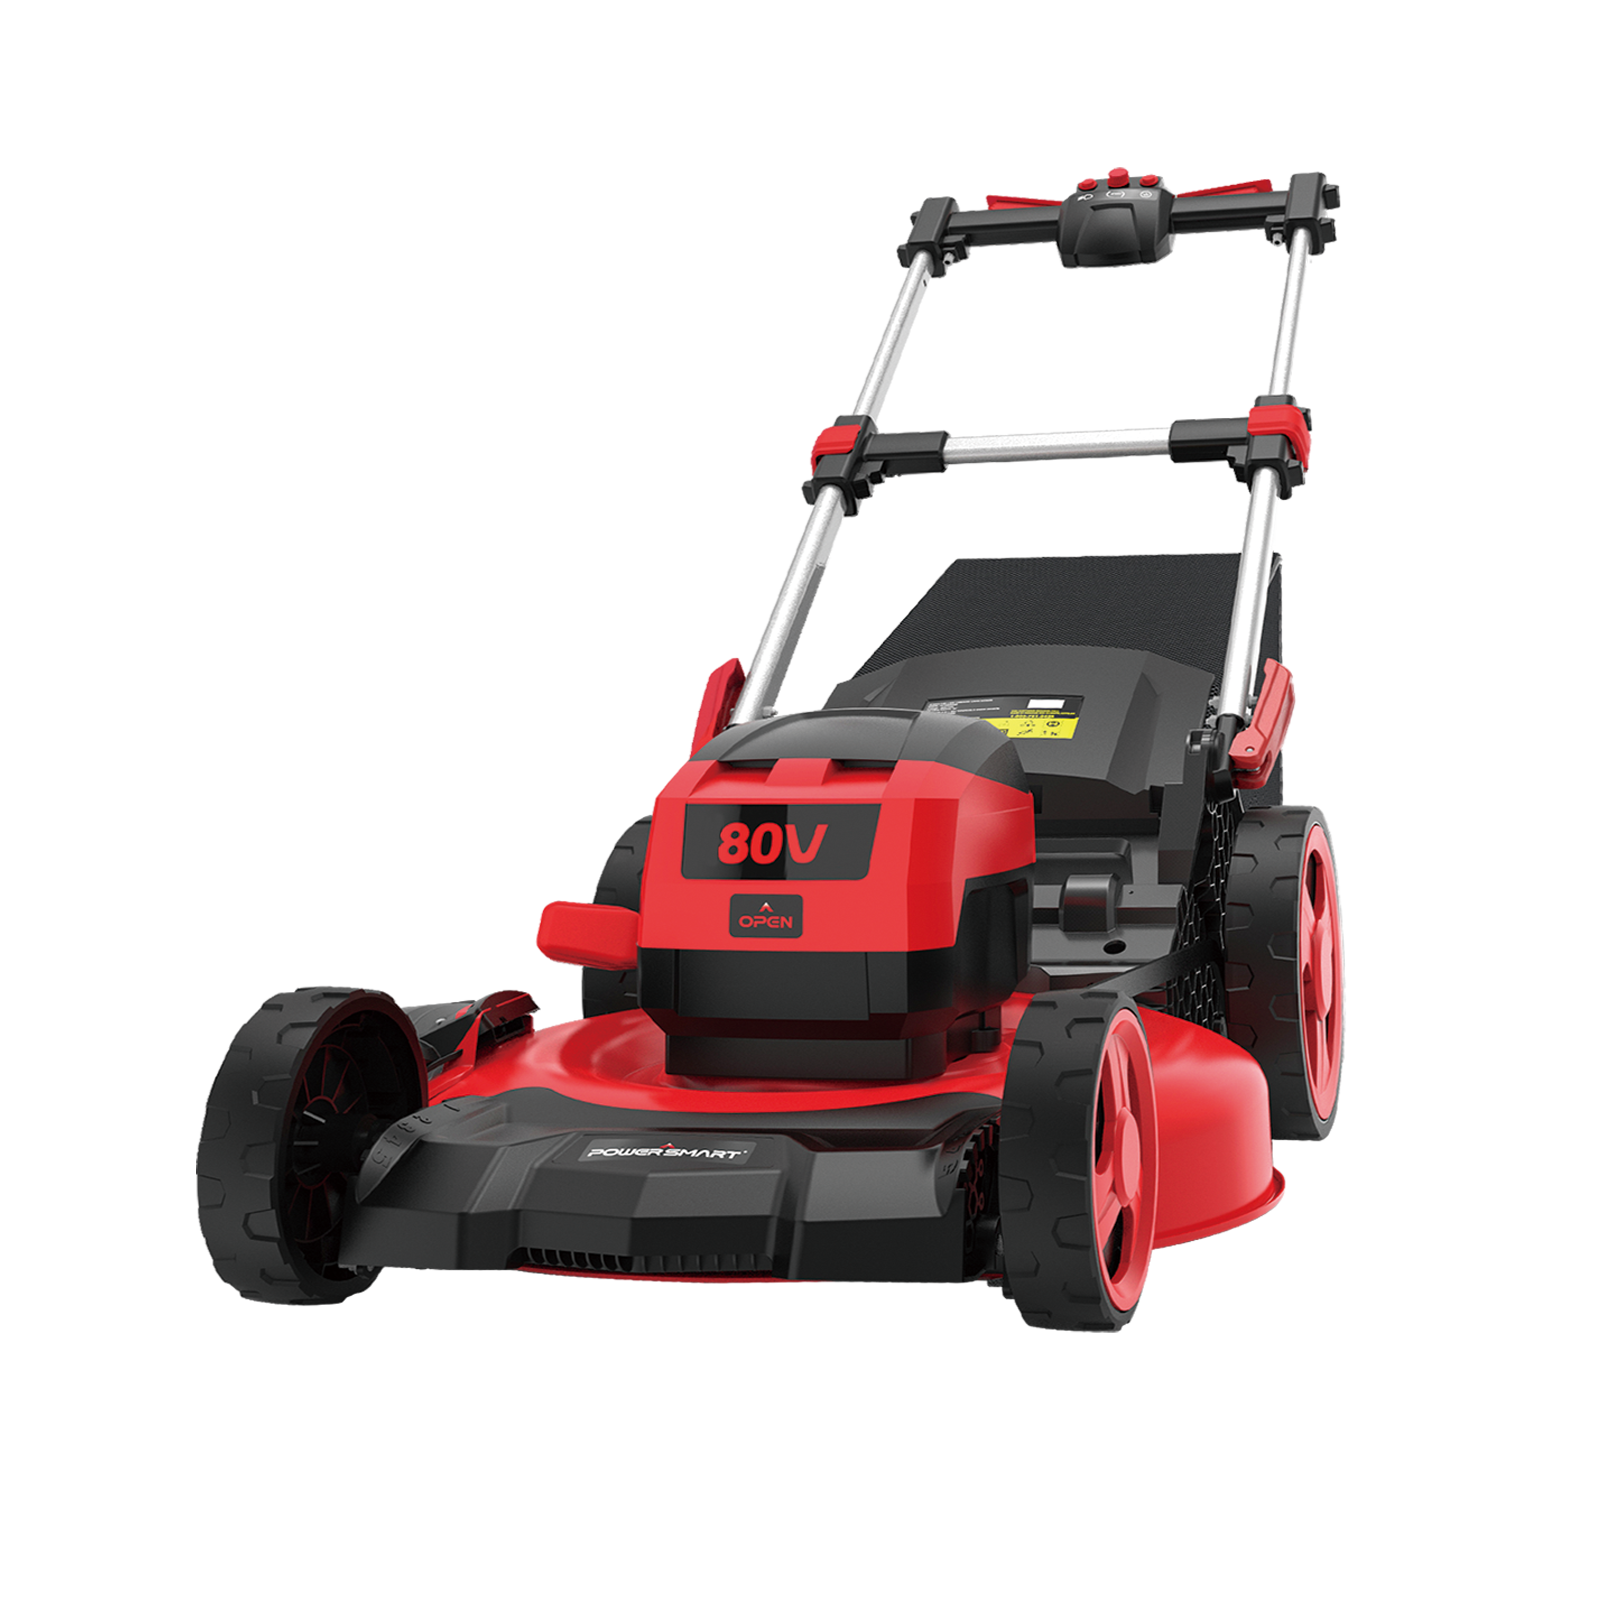 DC- 22” Cordless 80V Self-Propelled Lawn Mower